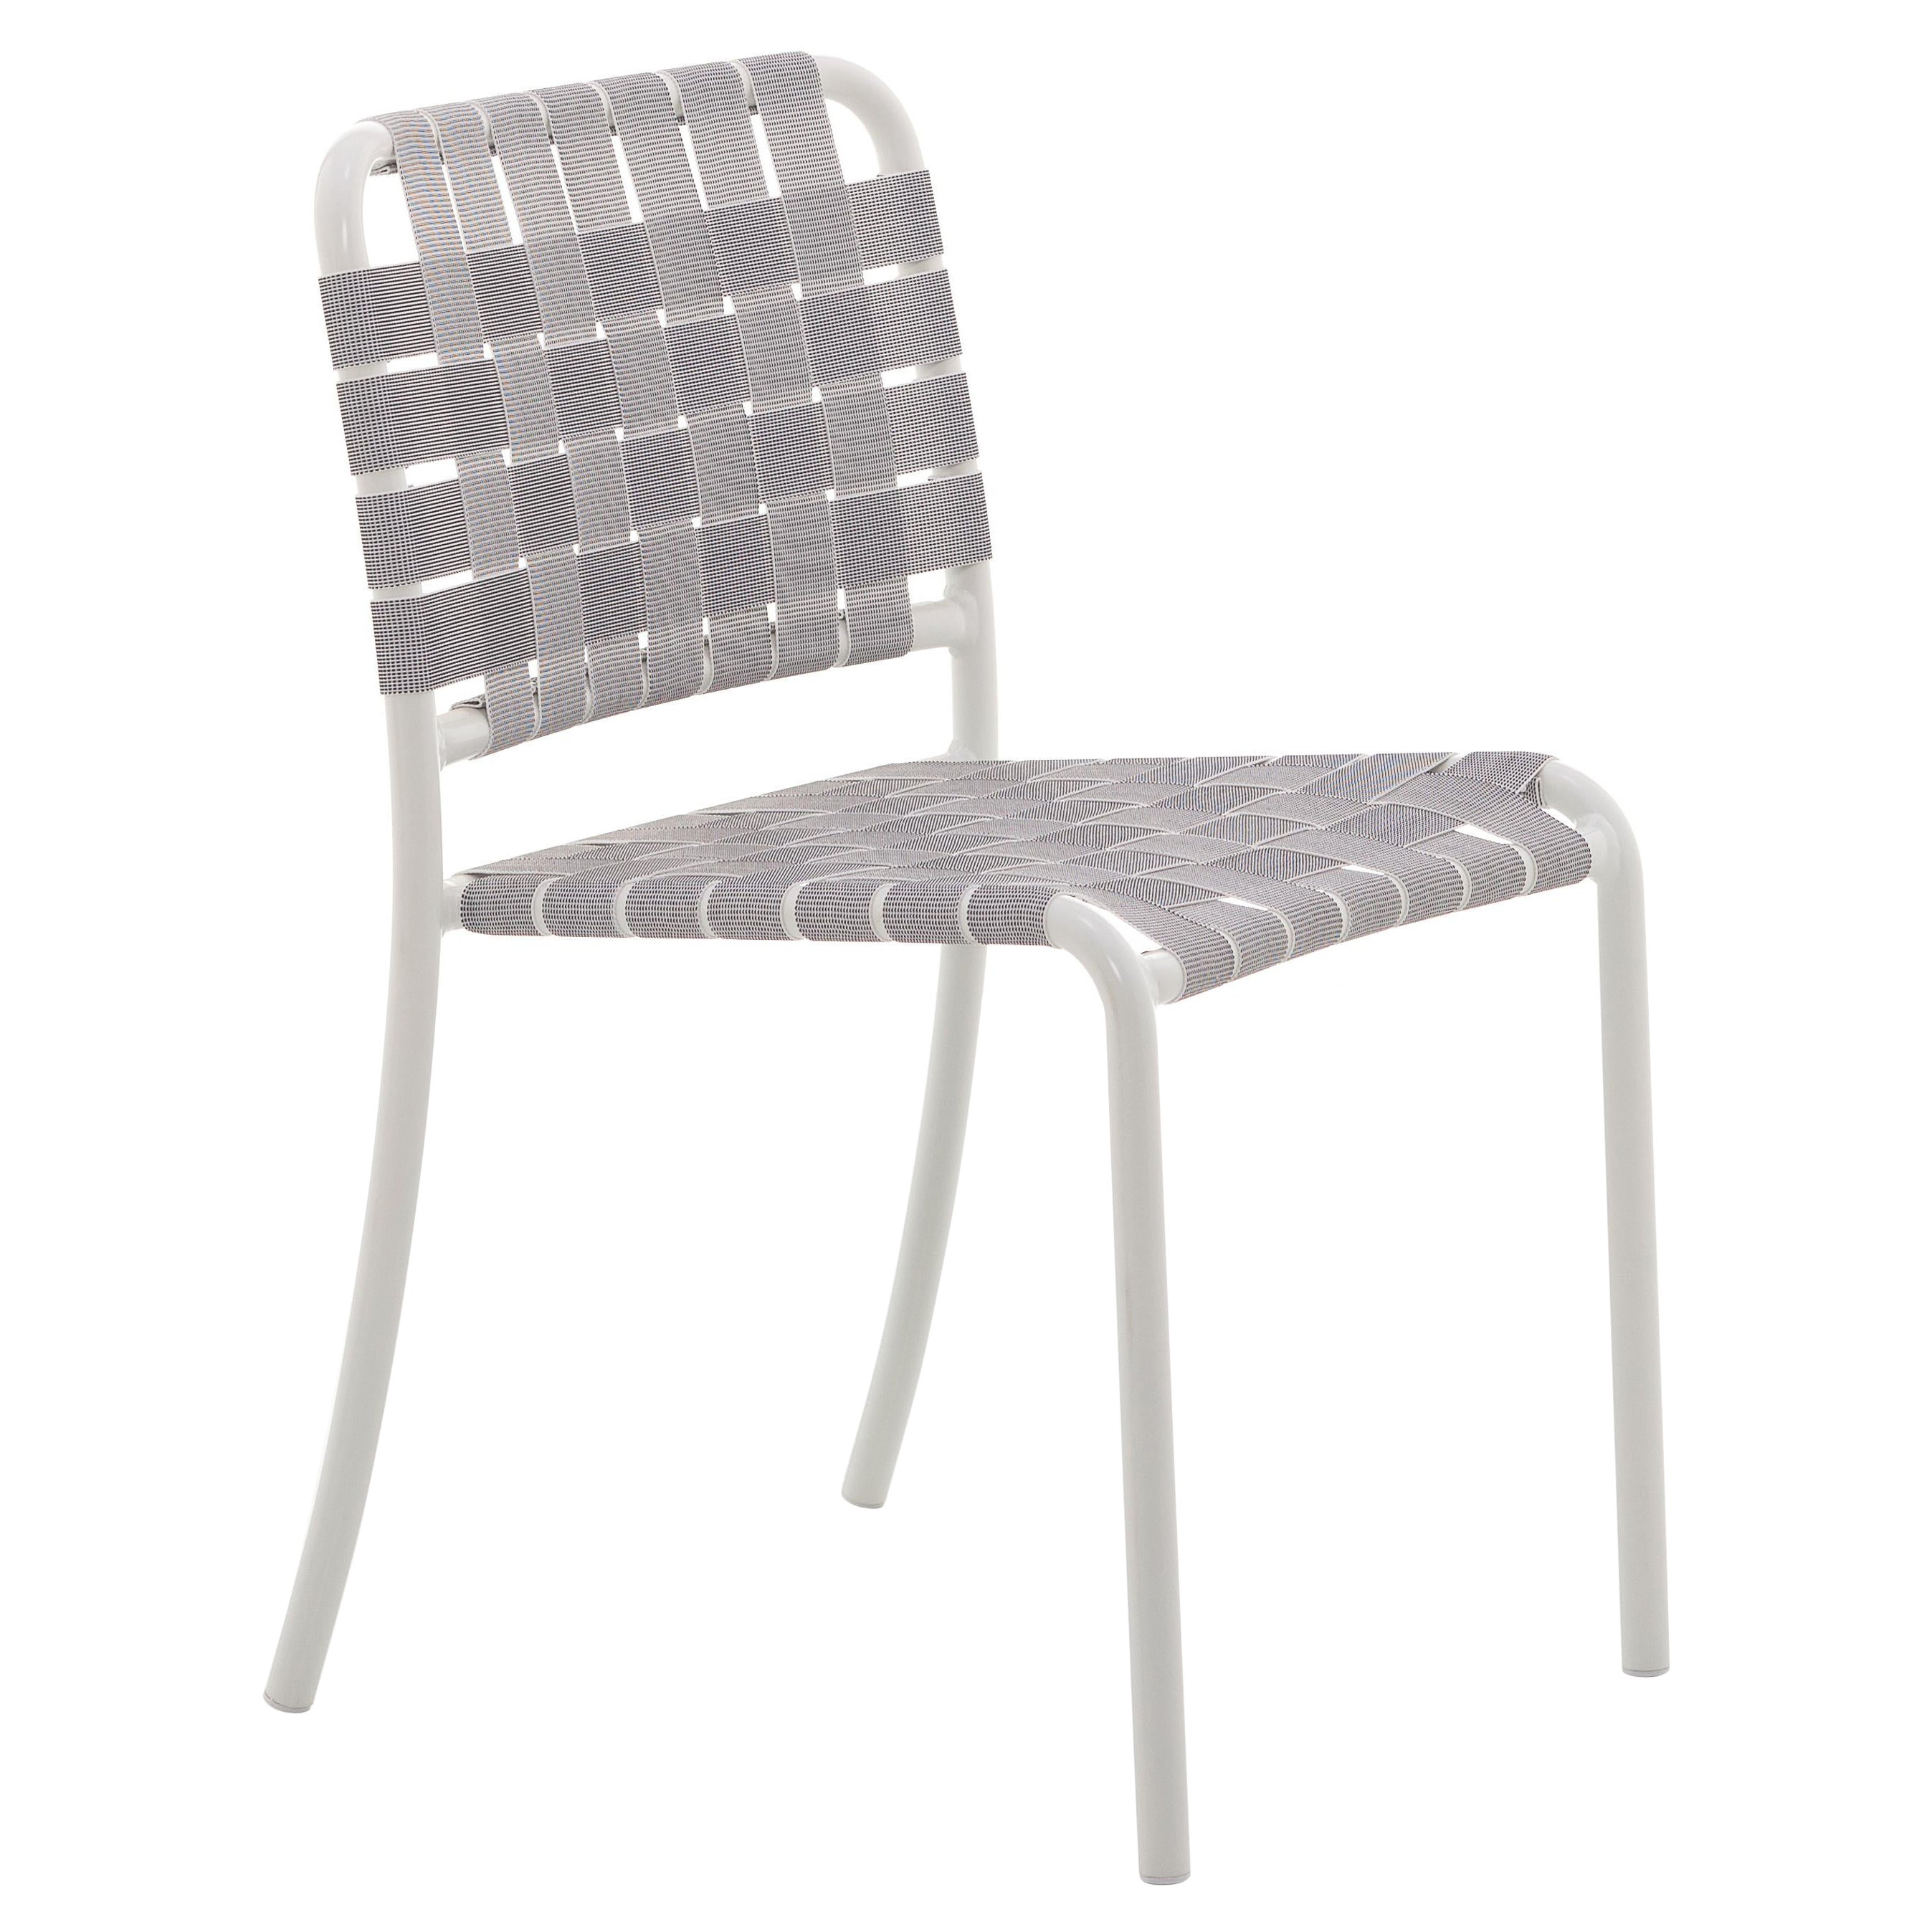 Gervasoni Inout Chair in Woven with Grey Elastic Belts and White Aluminium Frame